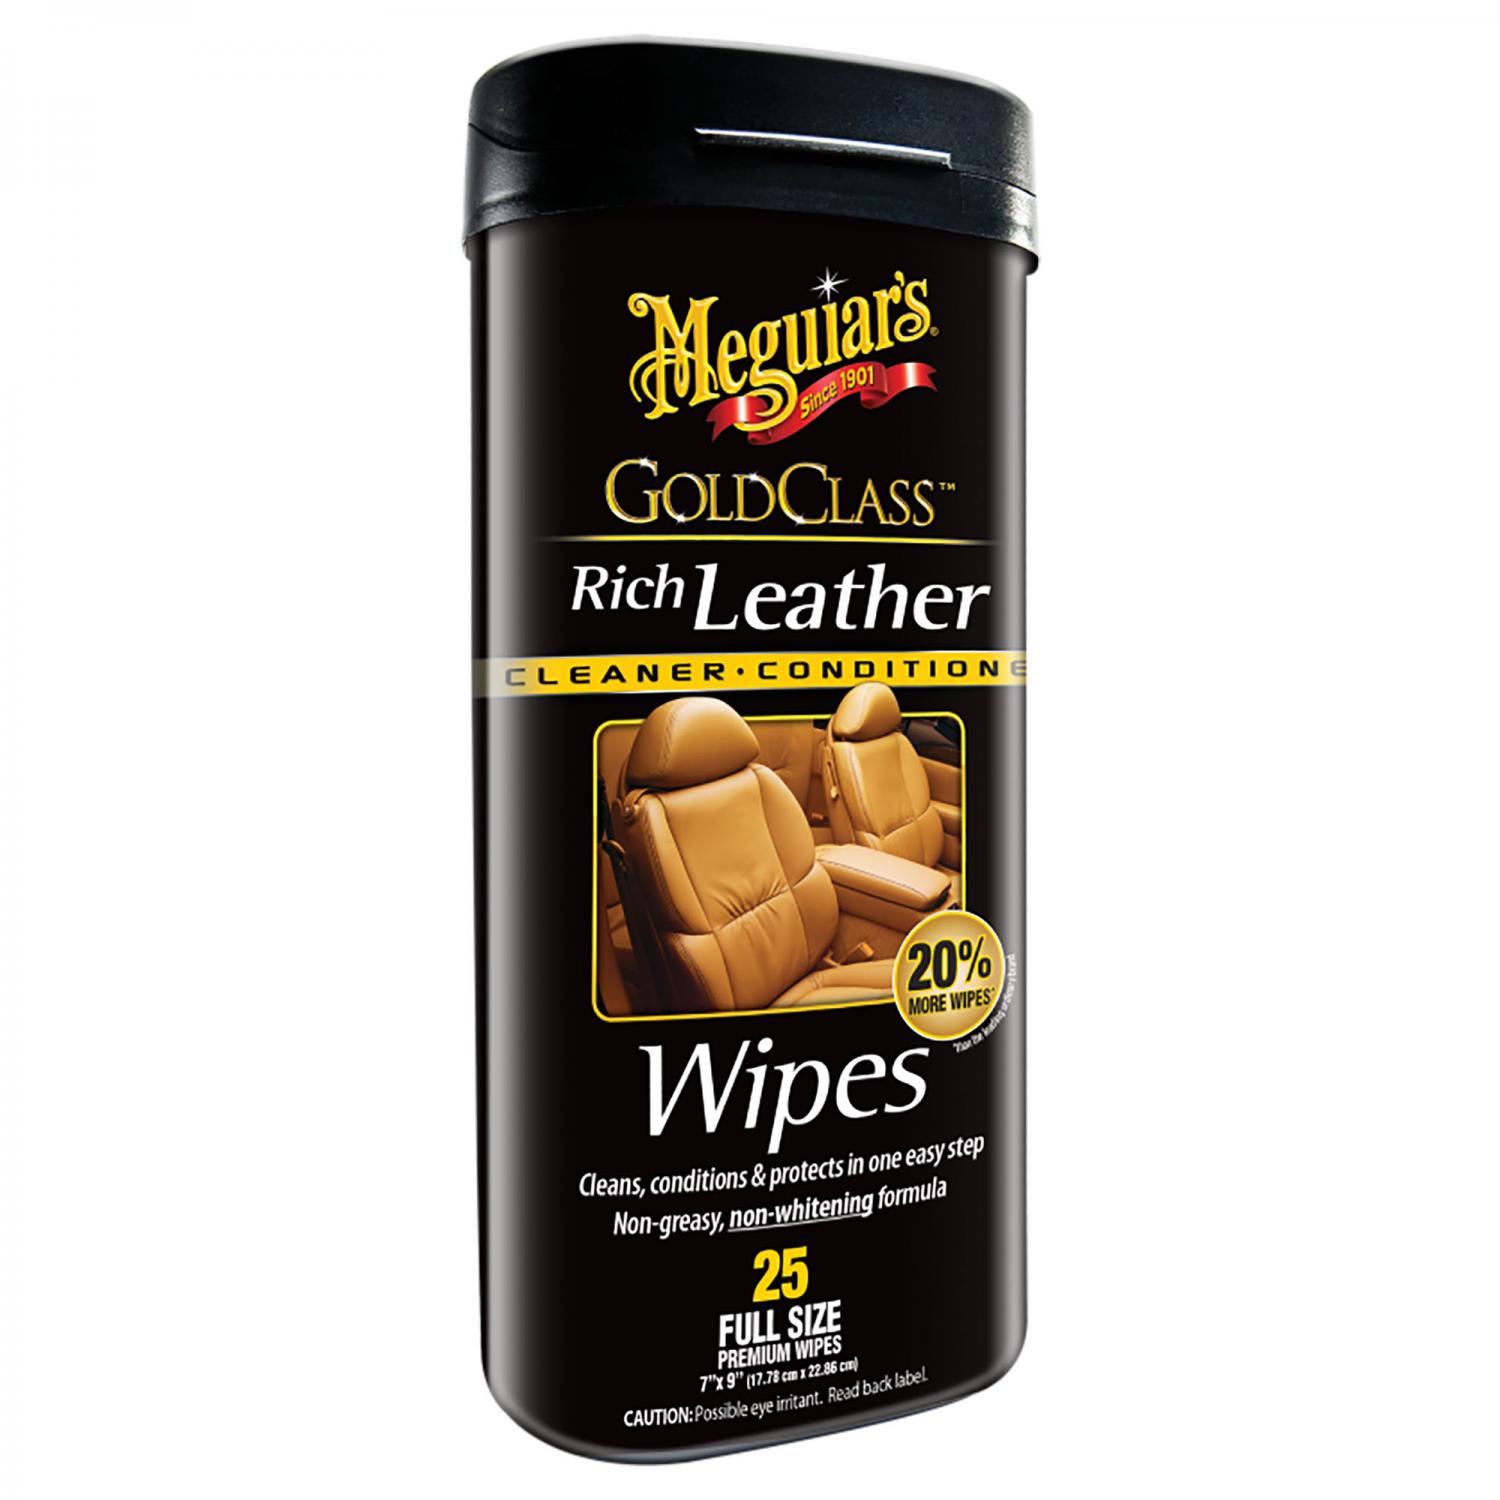 Gold Class Rich Leather Wipes  Meguiars